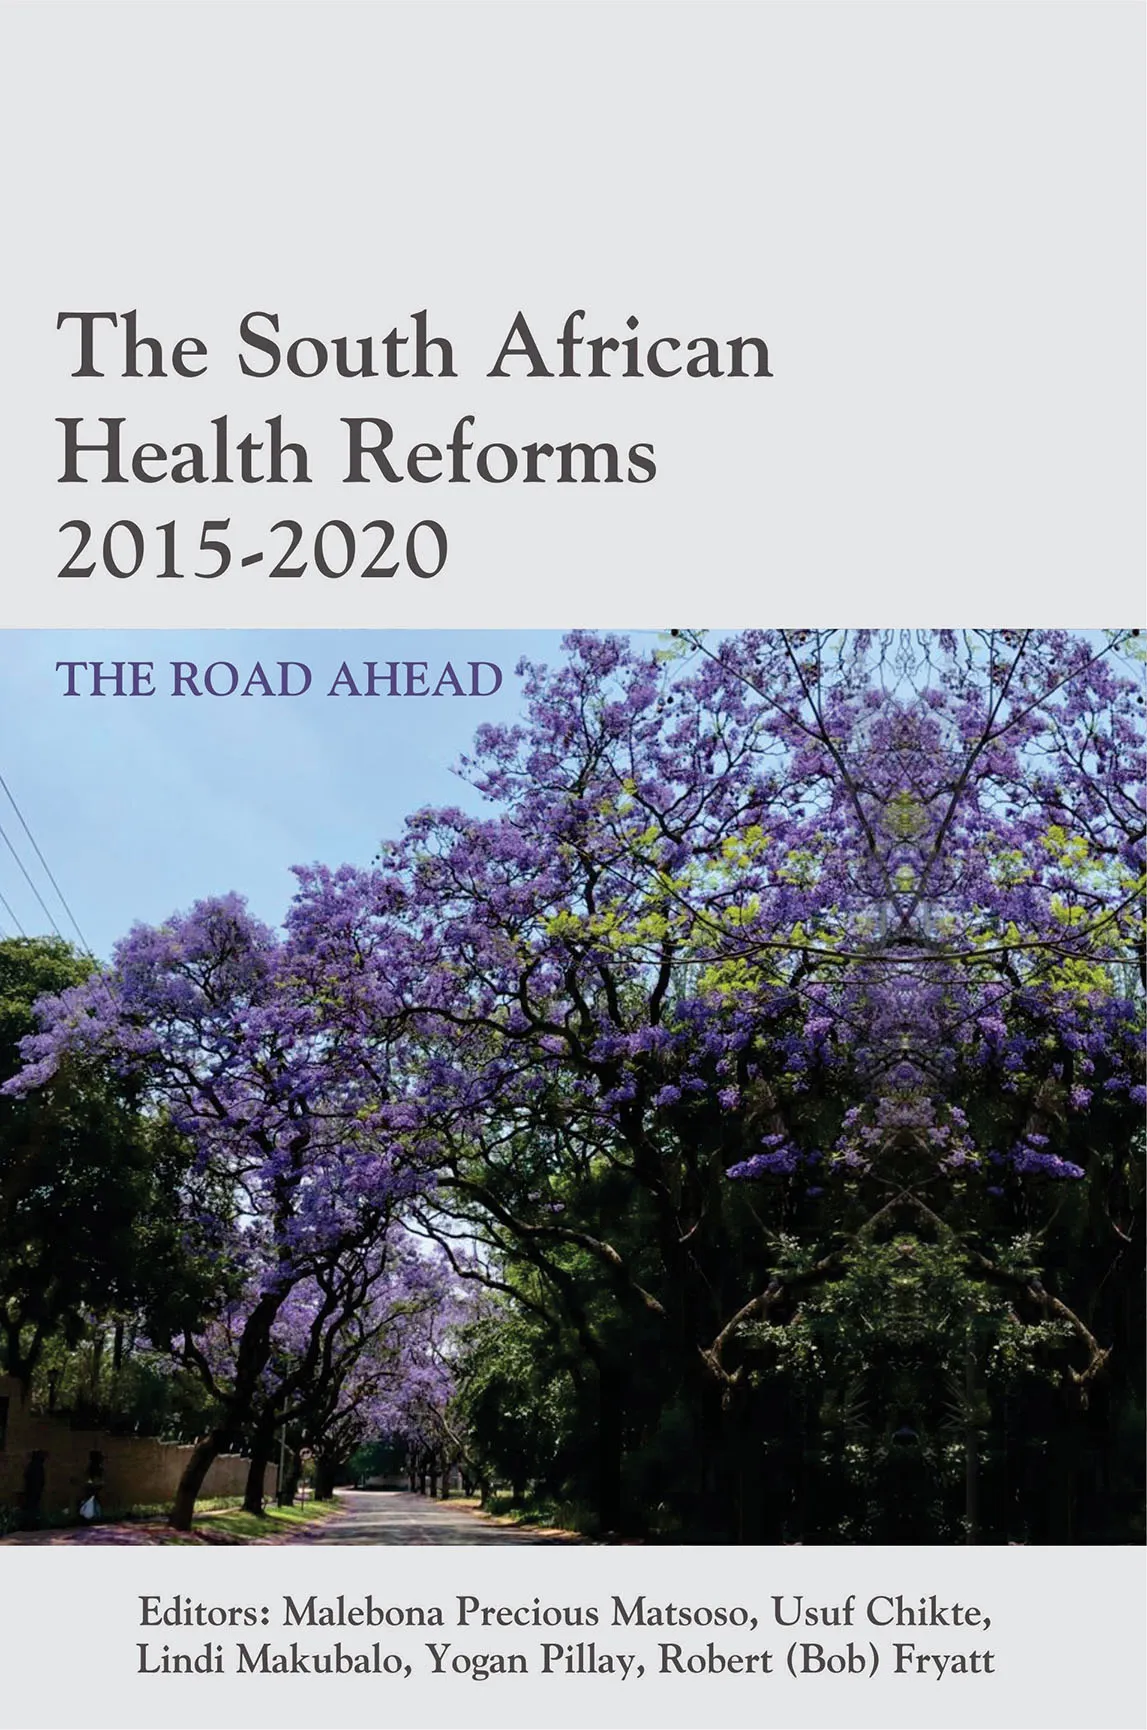 South African Health Reform, 2015-2020 – the road ahead